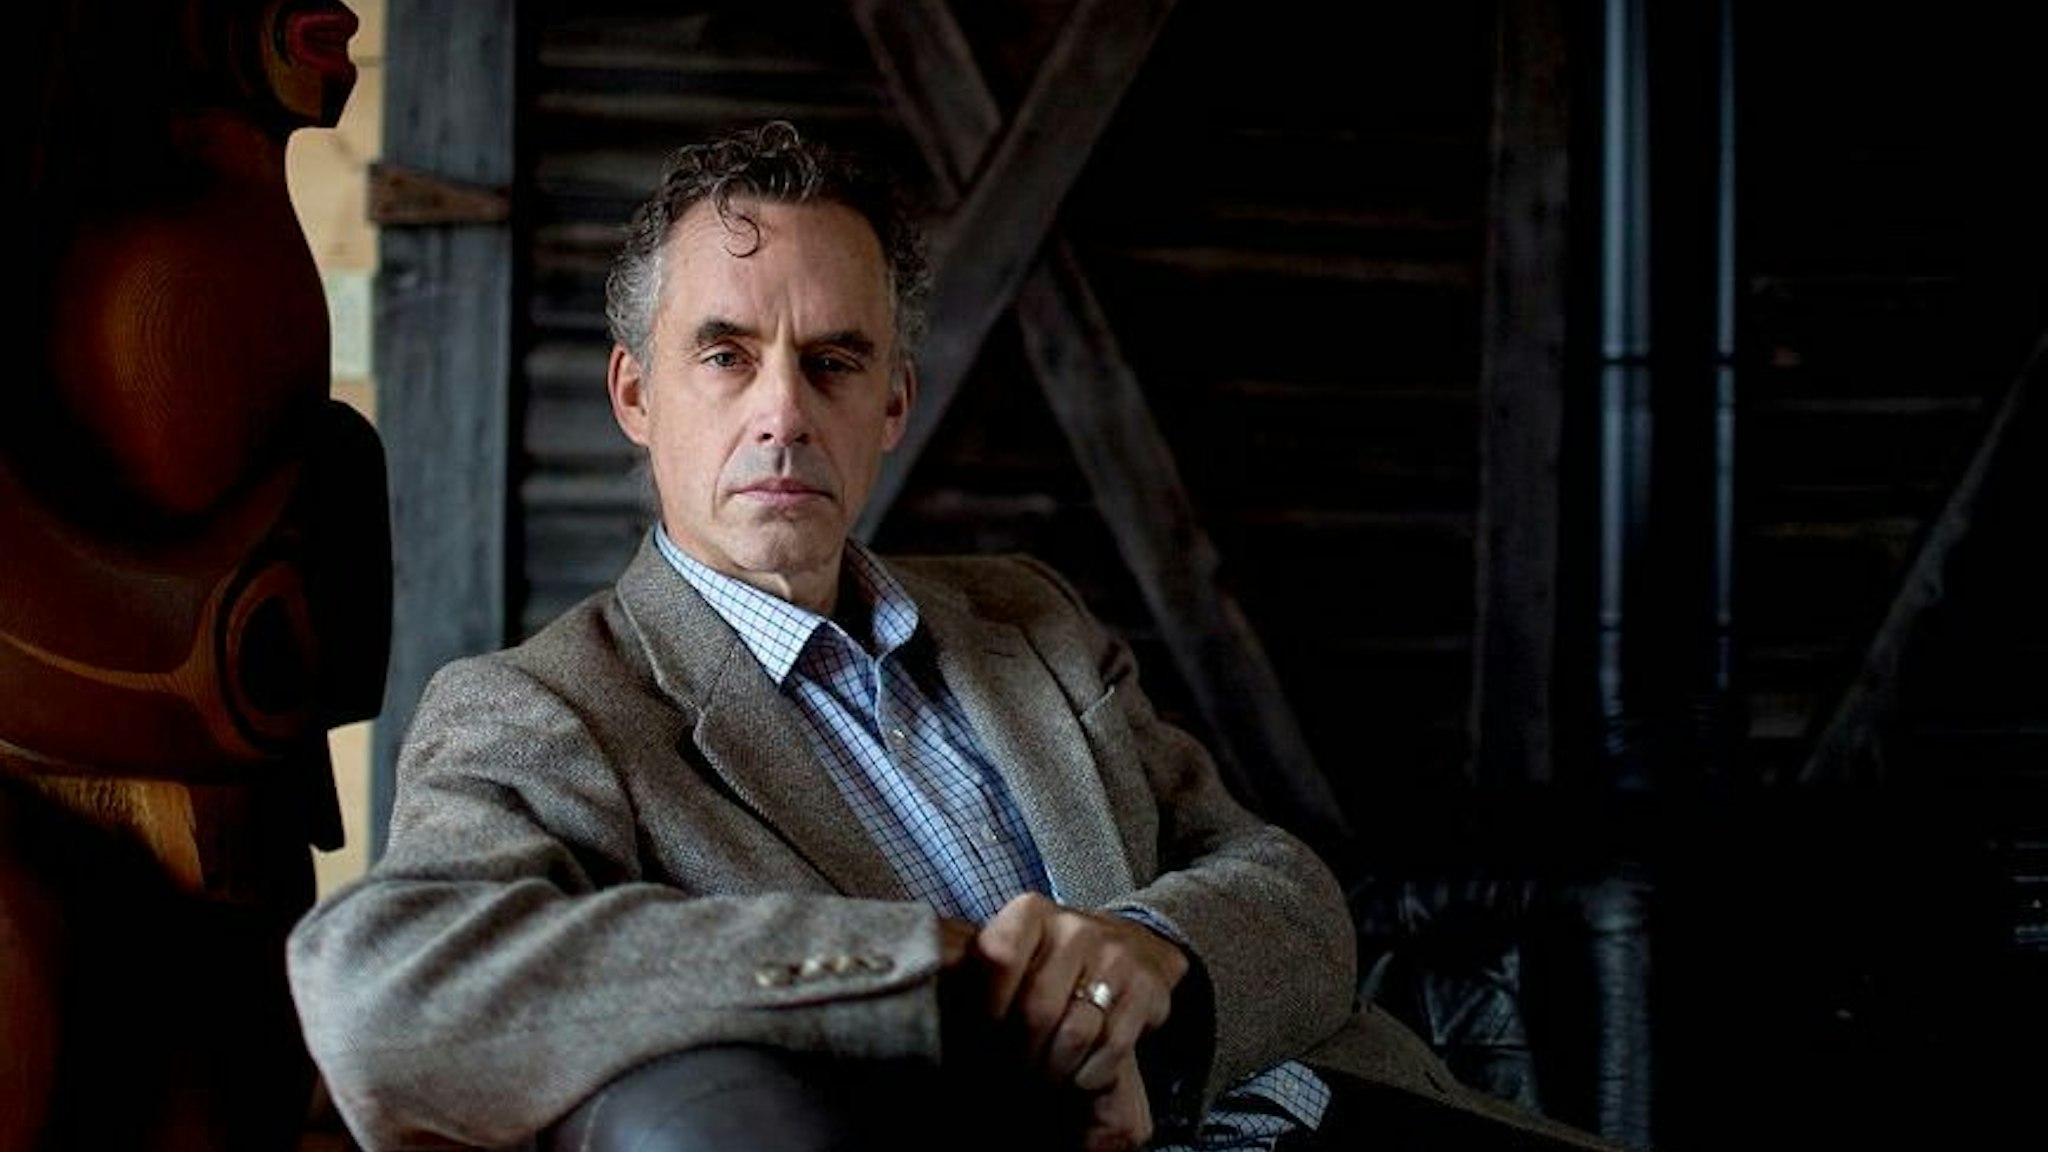 Profile of Dr. Jordan Peterson. The U of T prof at the centre of a media storm because of his public declaration that he will not use pronouns, such as "they," to recognize non-binary genders.